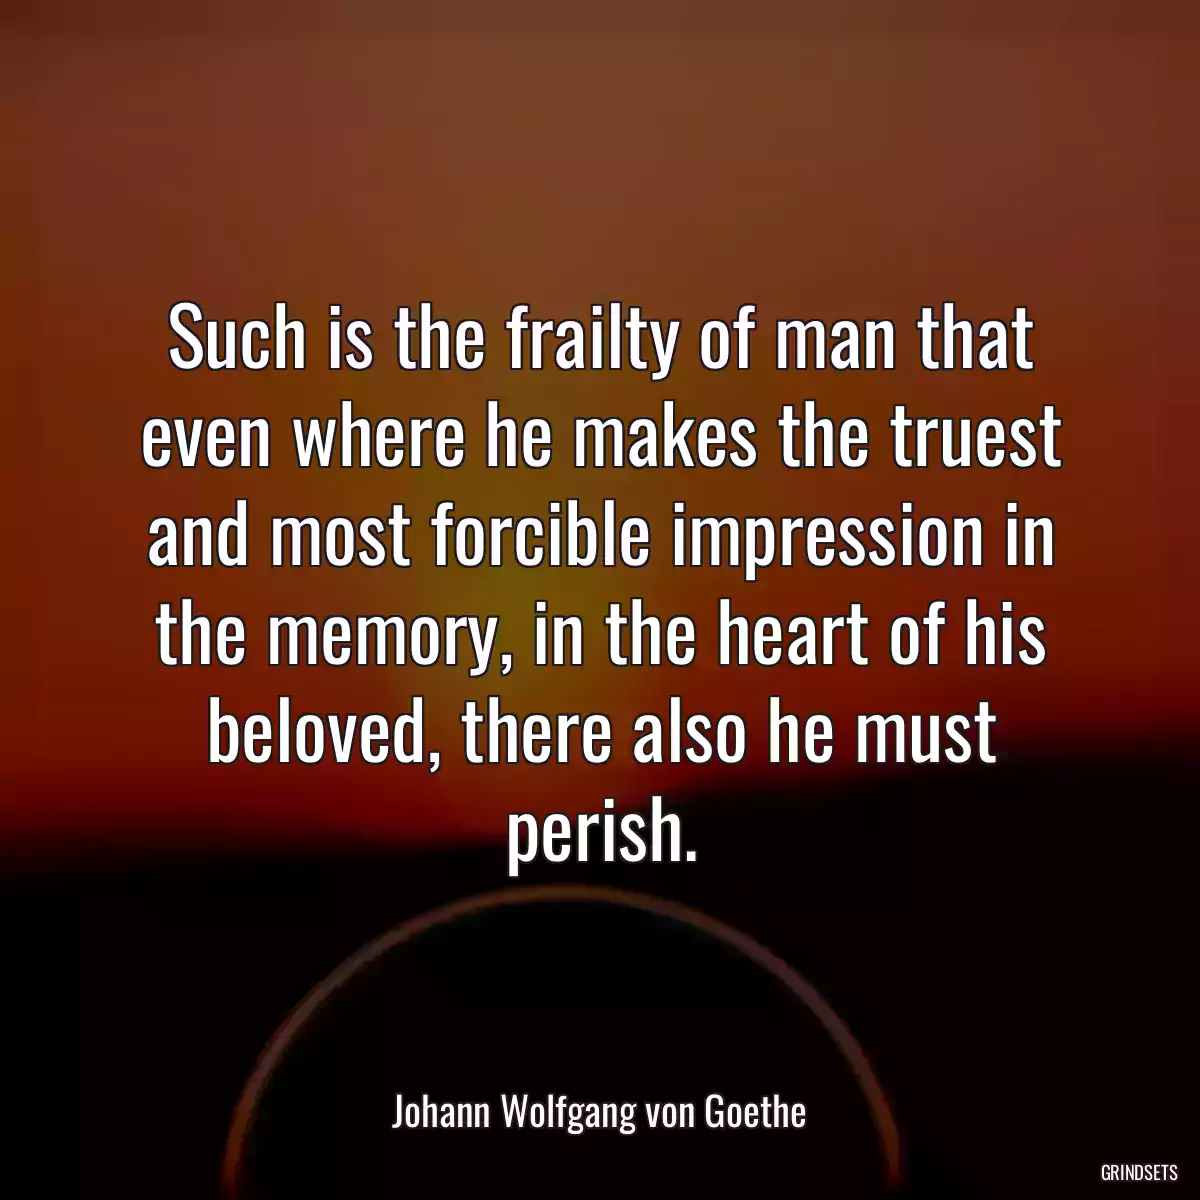 Such is the frailty of man that even where he makes the truest and most forcible impression in the memory, in the heart of his beloved, there also he must perish.